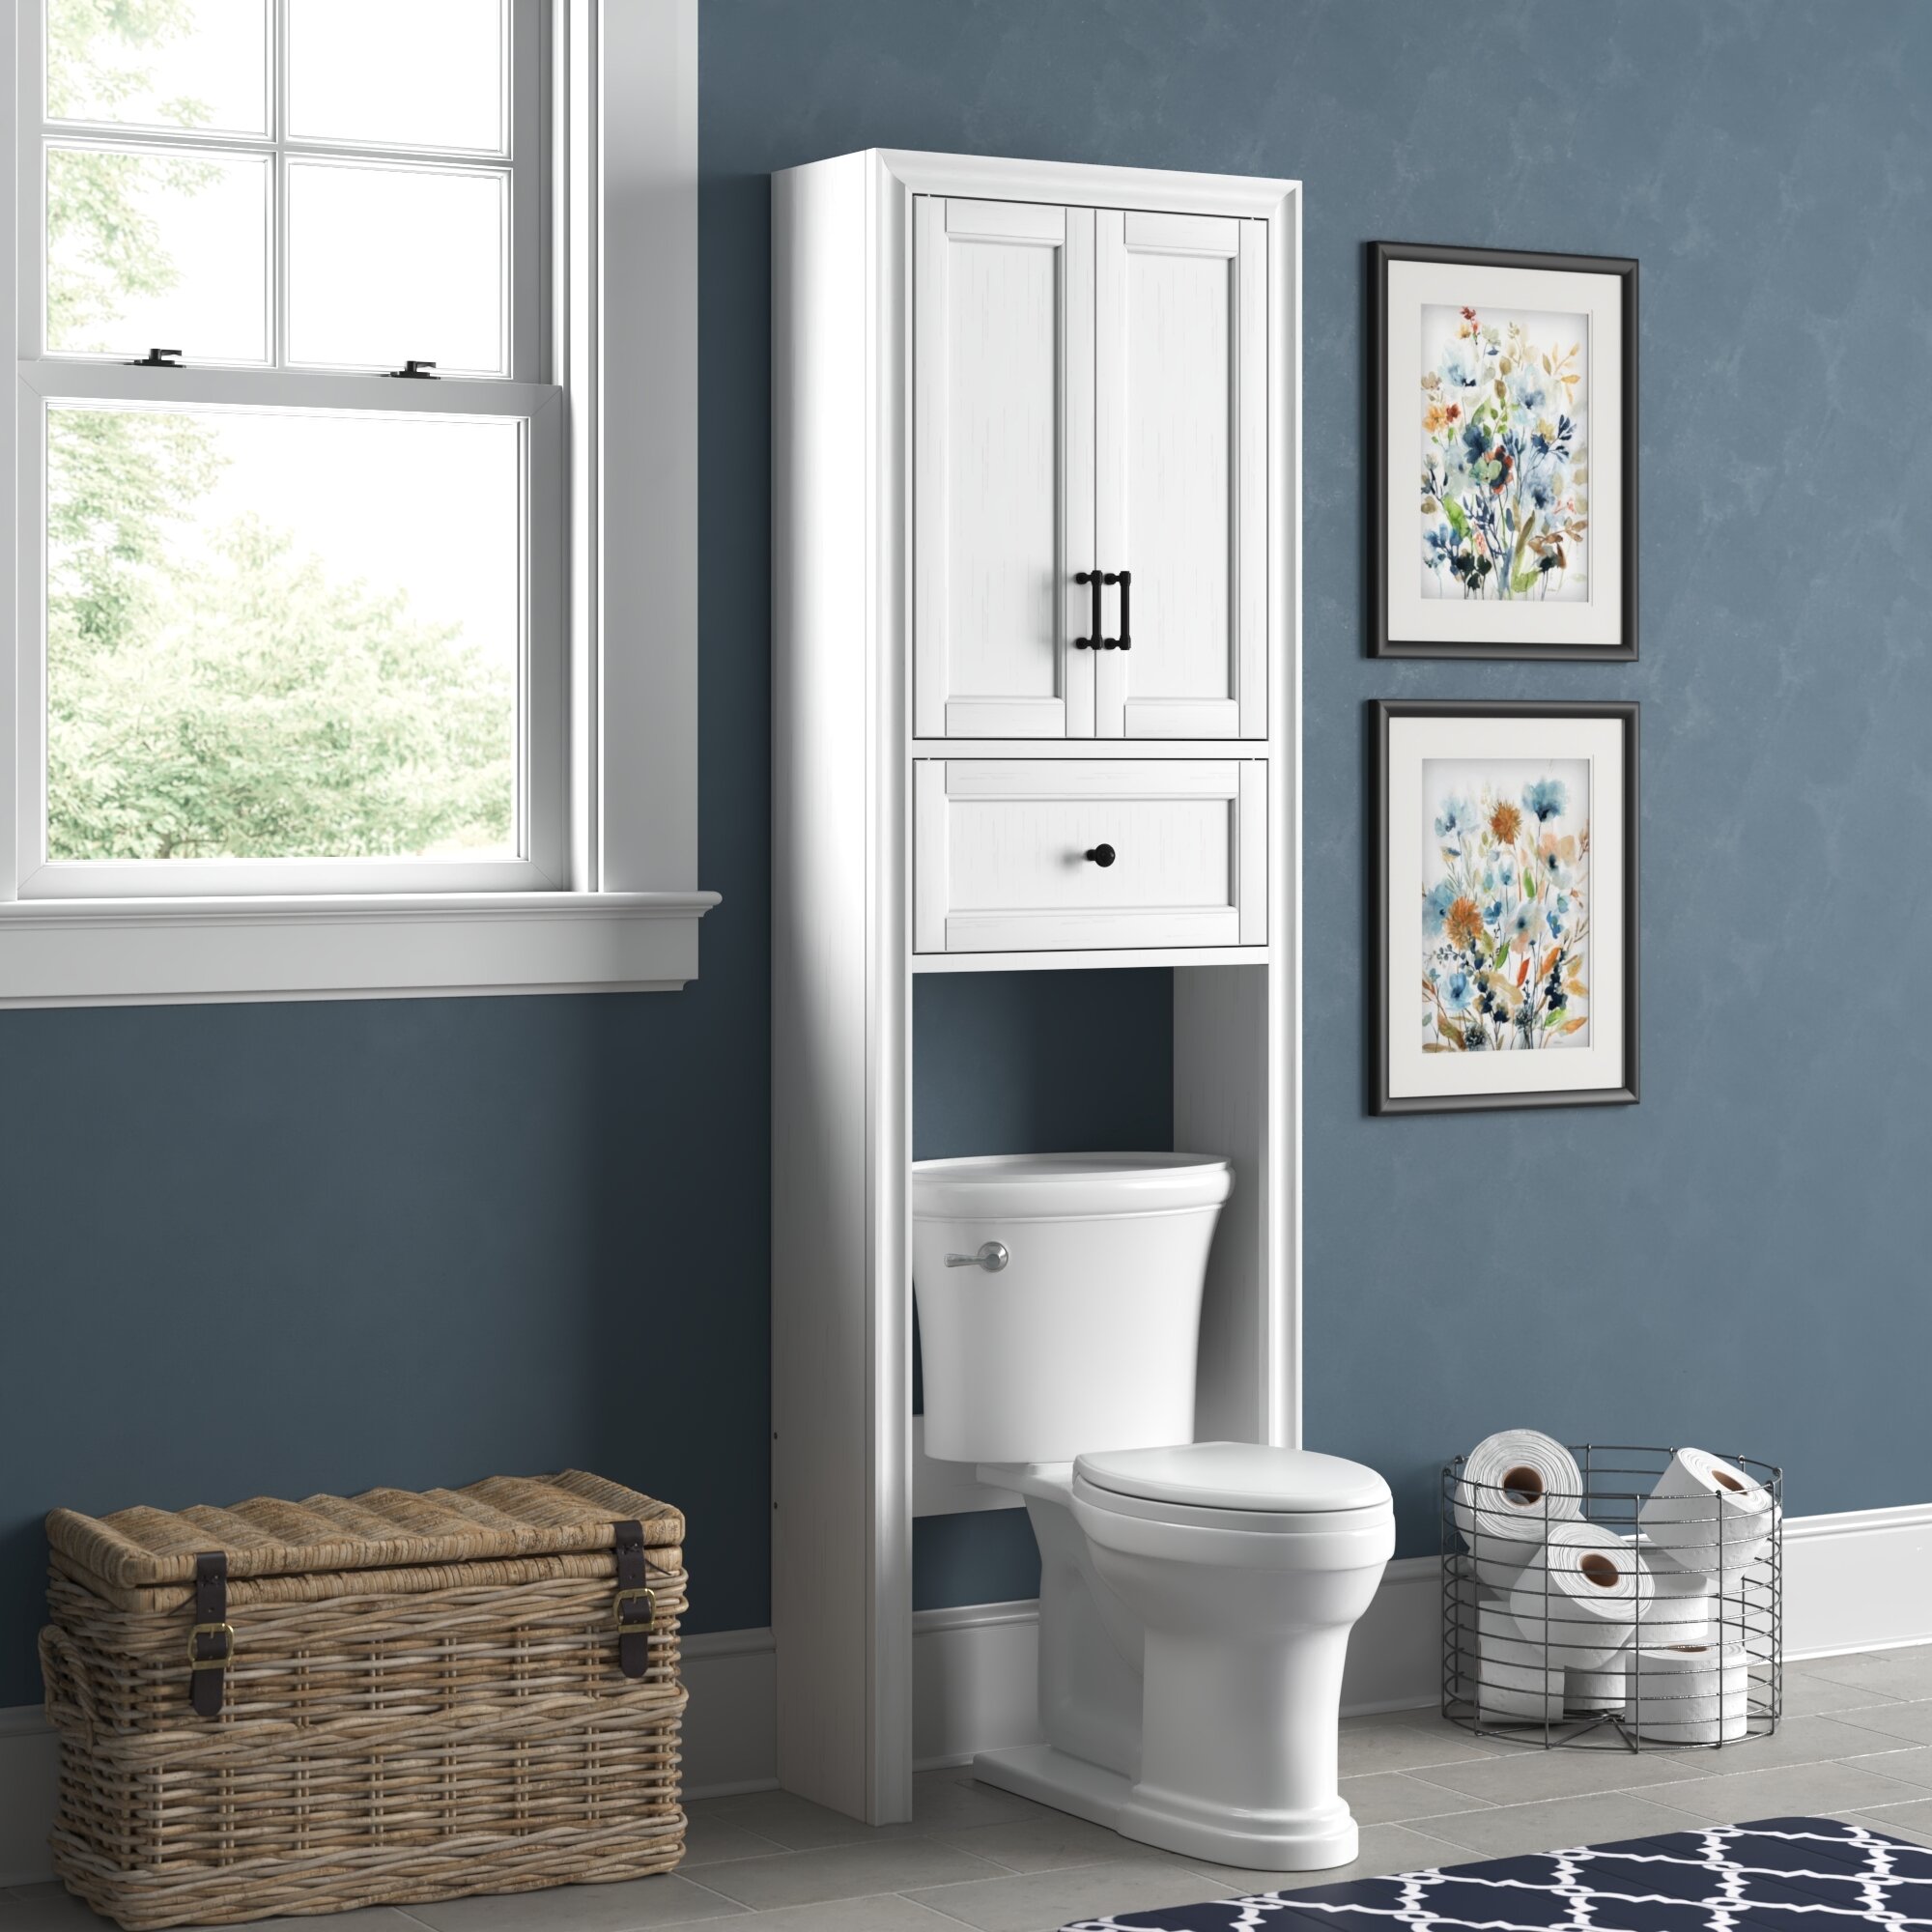 Highlands Double Toilet Paper Holder with Storage Cubby